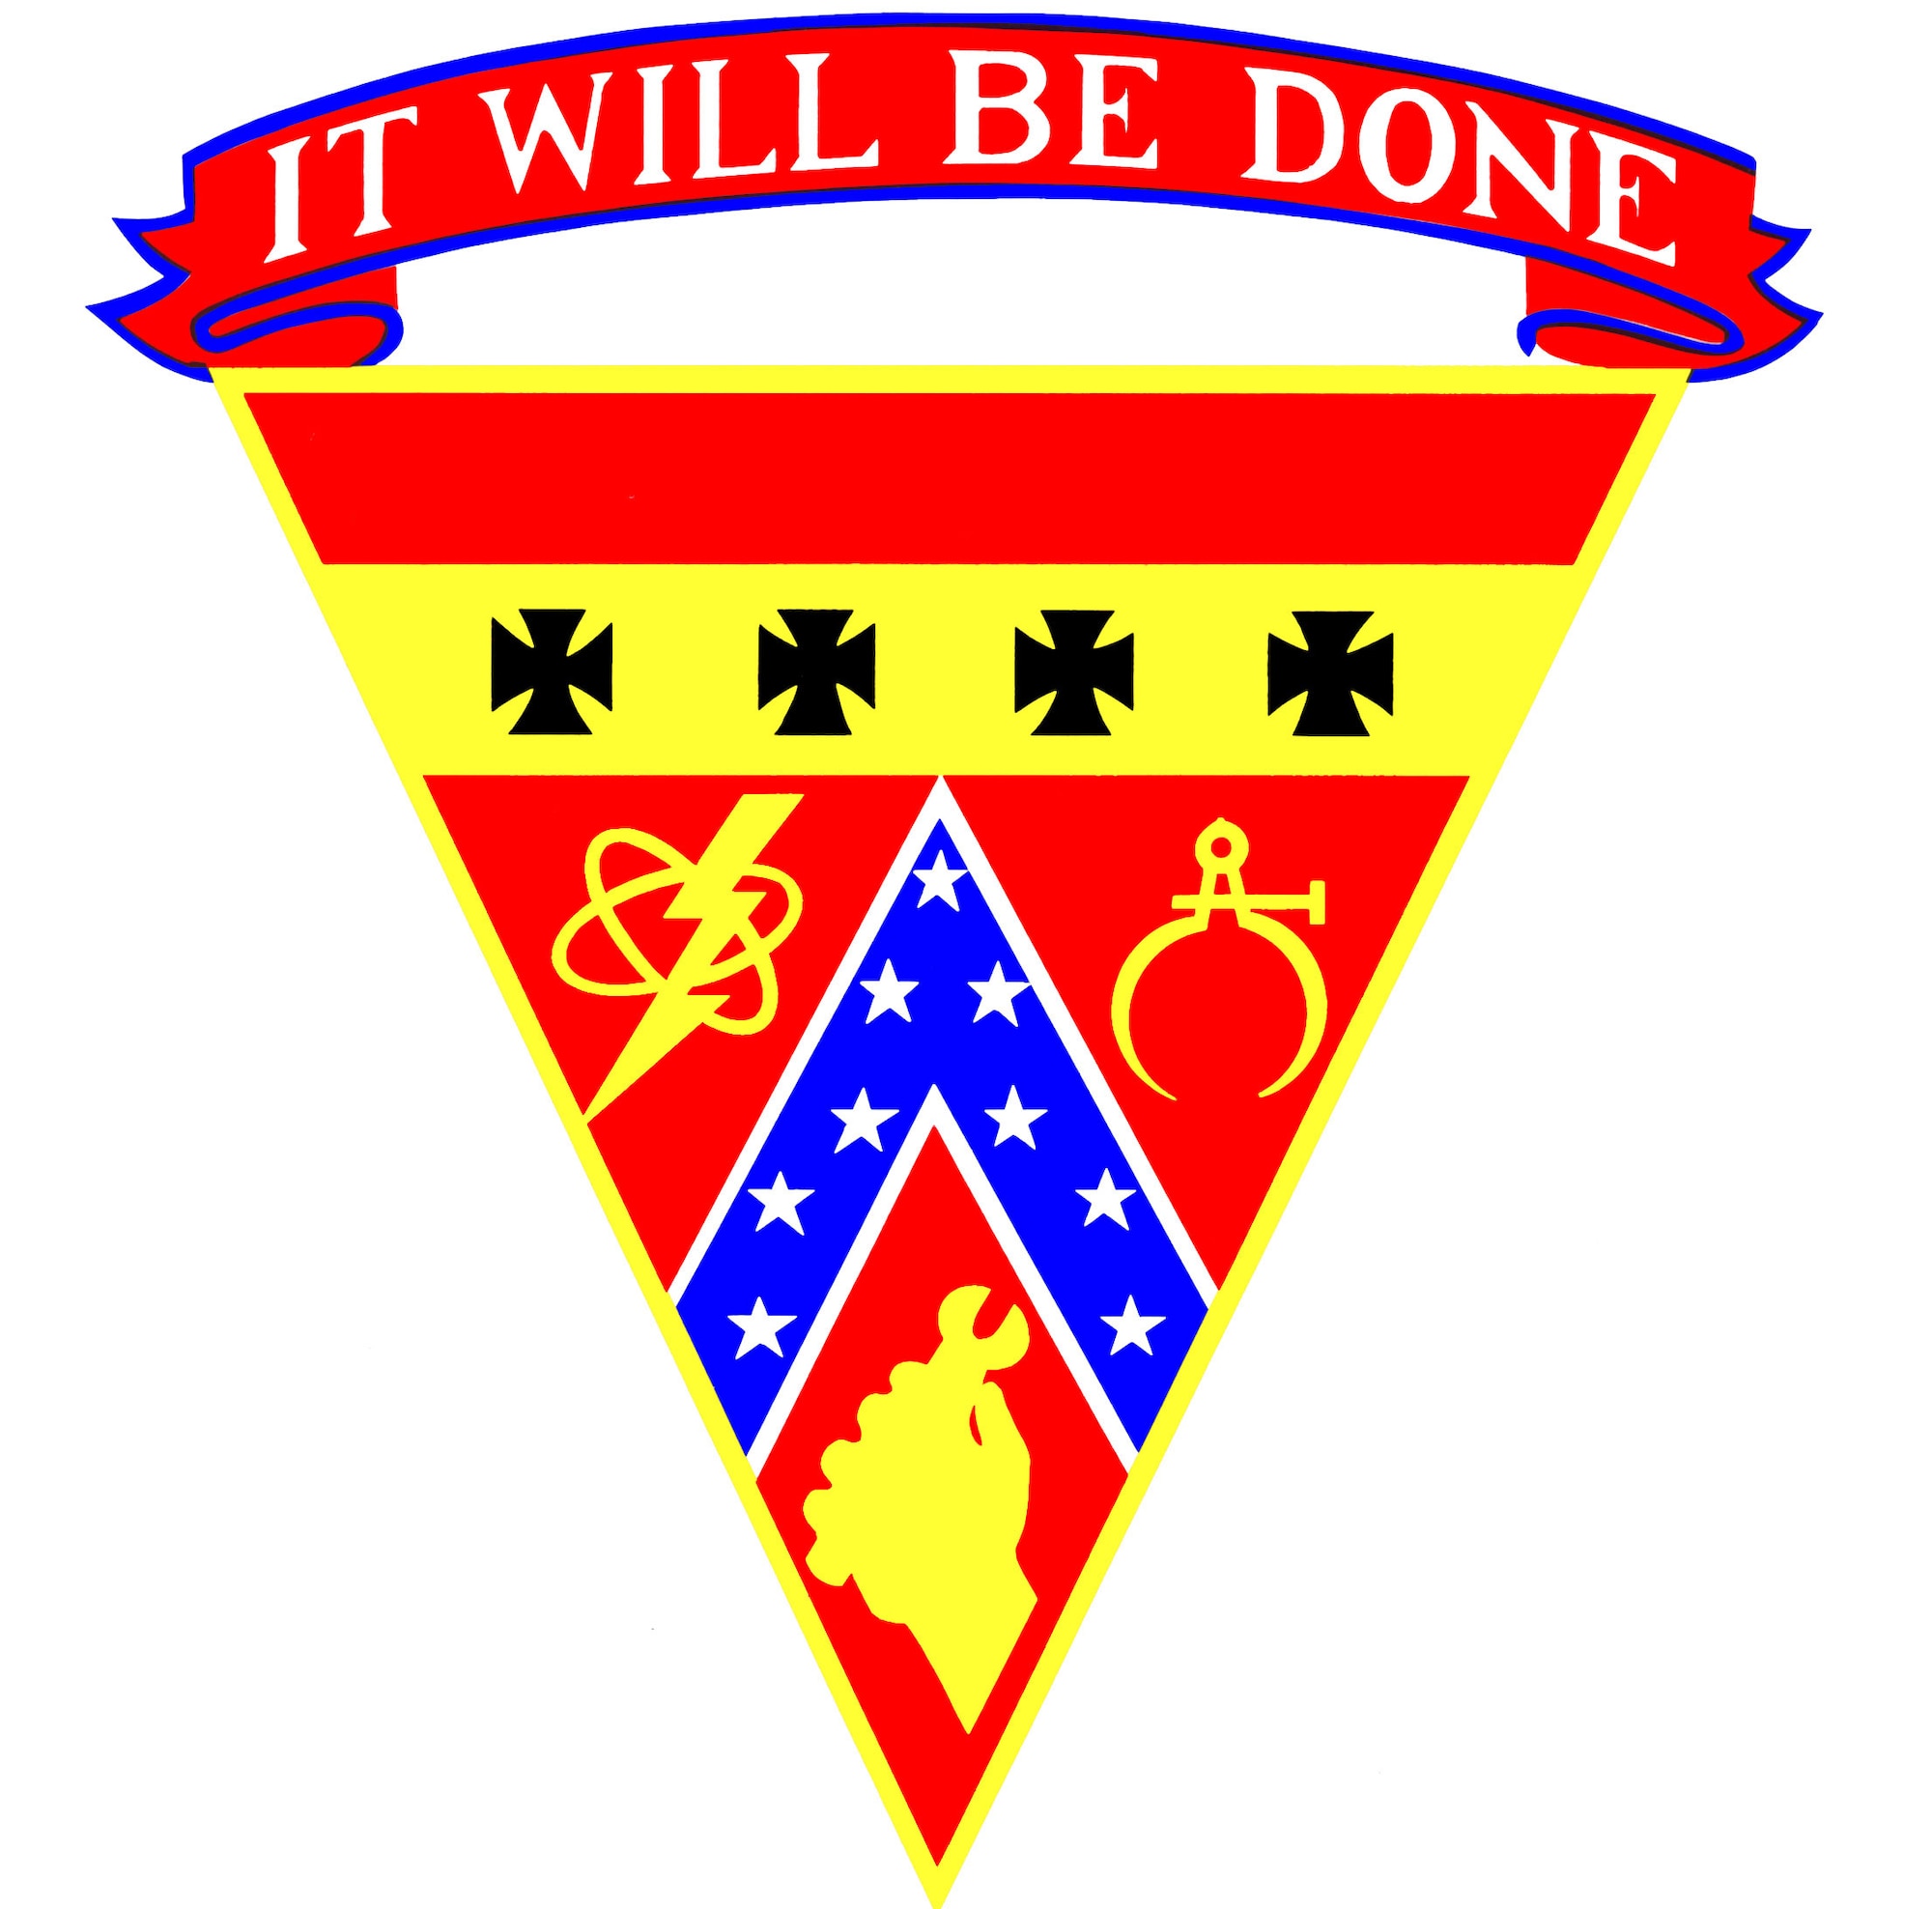 The 9th Maintenance Squadron patch. In accordance with Chapter 3 of AFI 84-105, commercial reproduction of this emblem is NOT permitted without the permission of the proponent organizational/unit commander. 